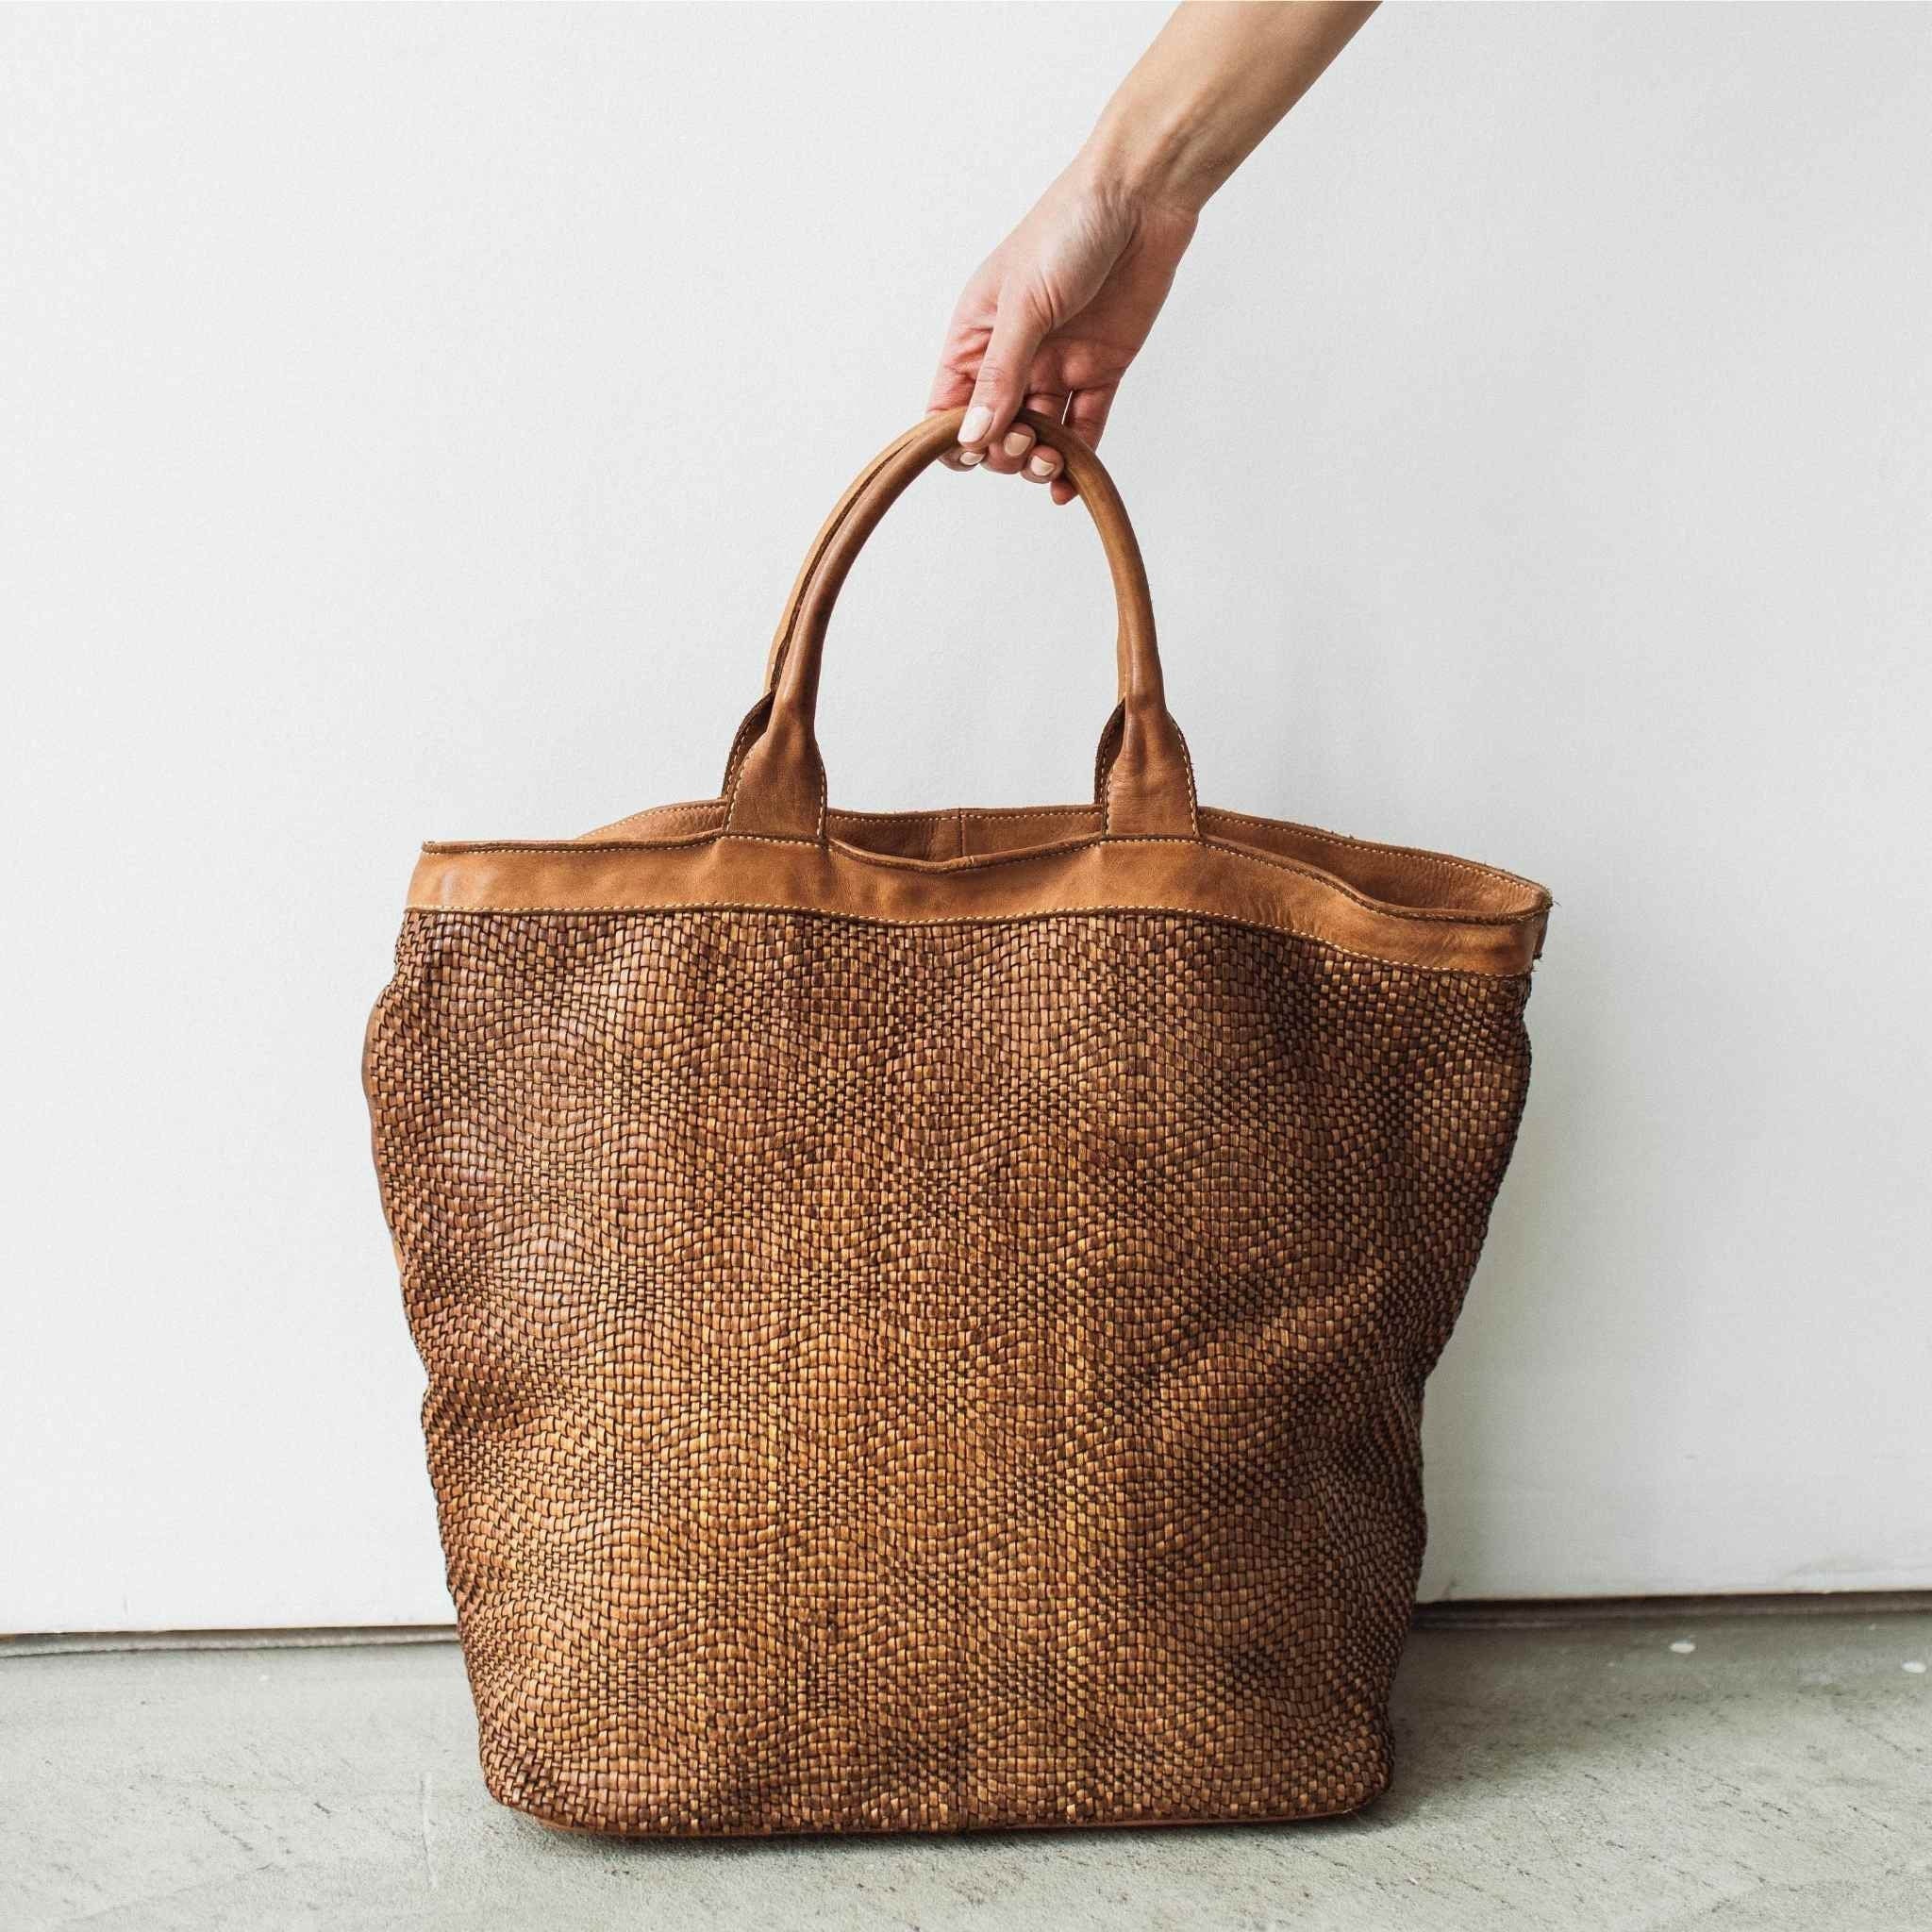 Sale Large Soft Woven Leather Tote Bag Italian Woven Leather Etsy